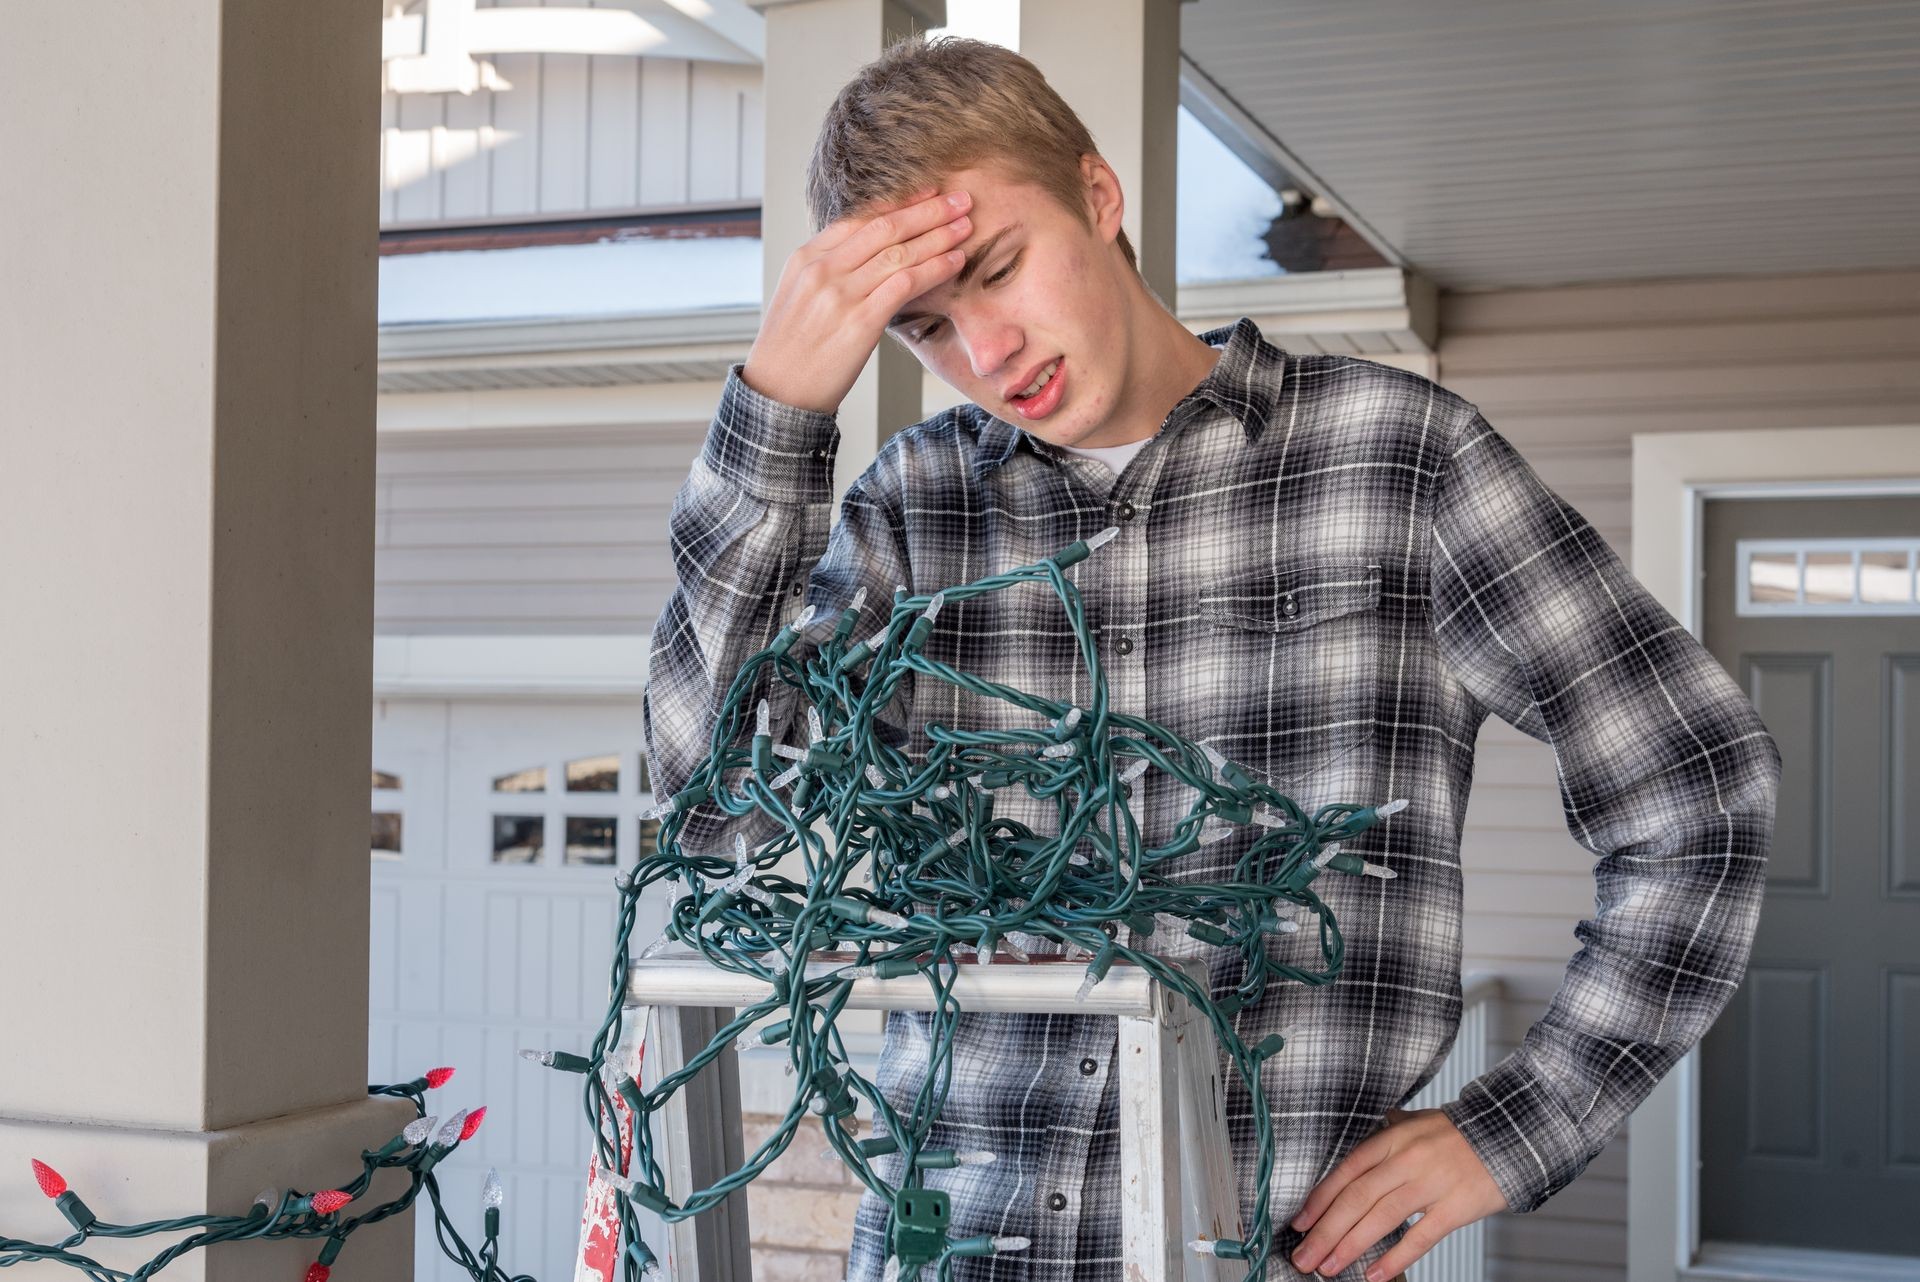 Man frustrated on a ladder while hanging tangled holiday lights.